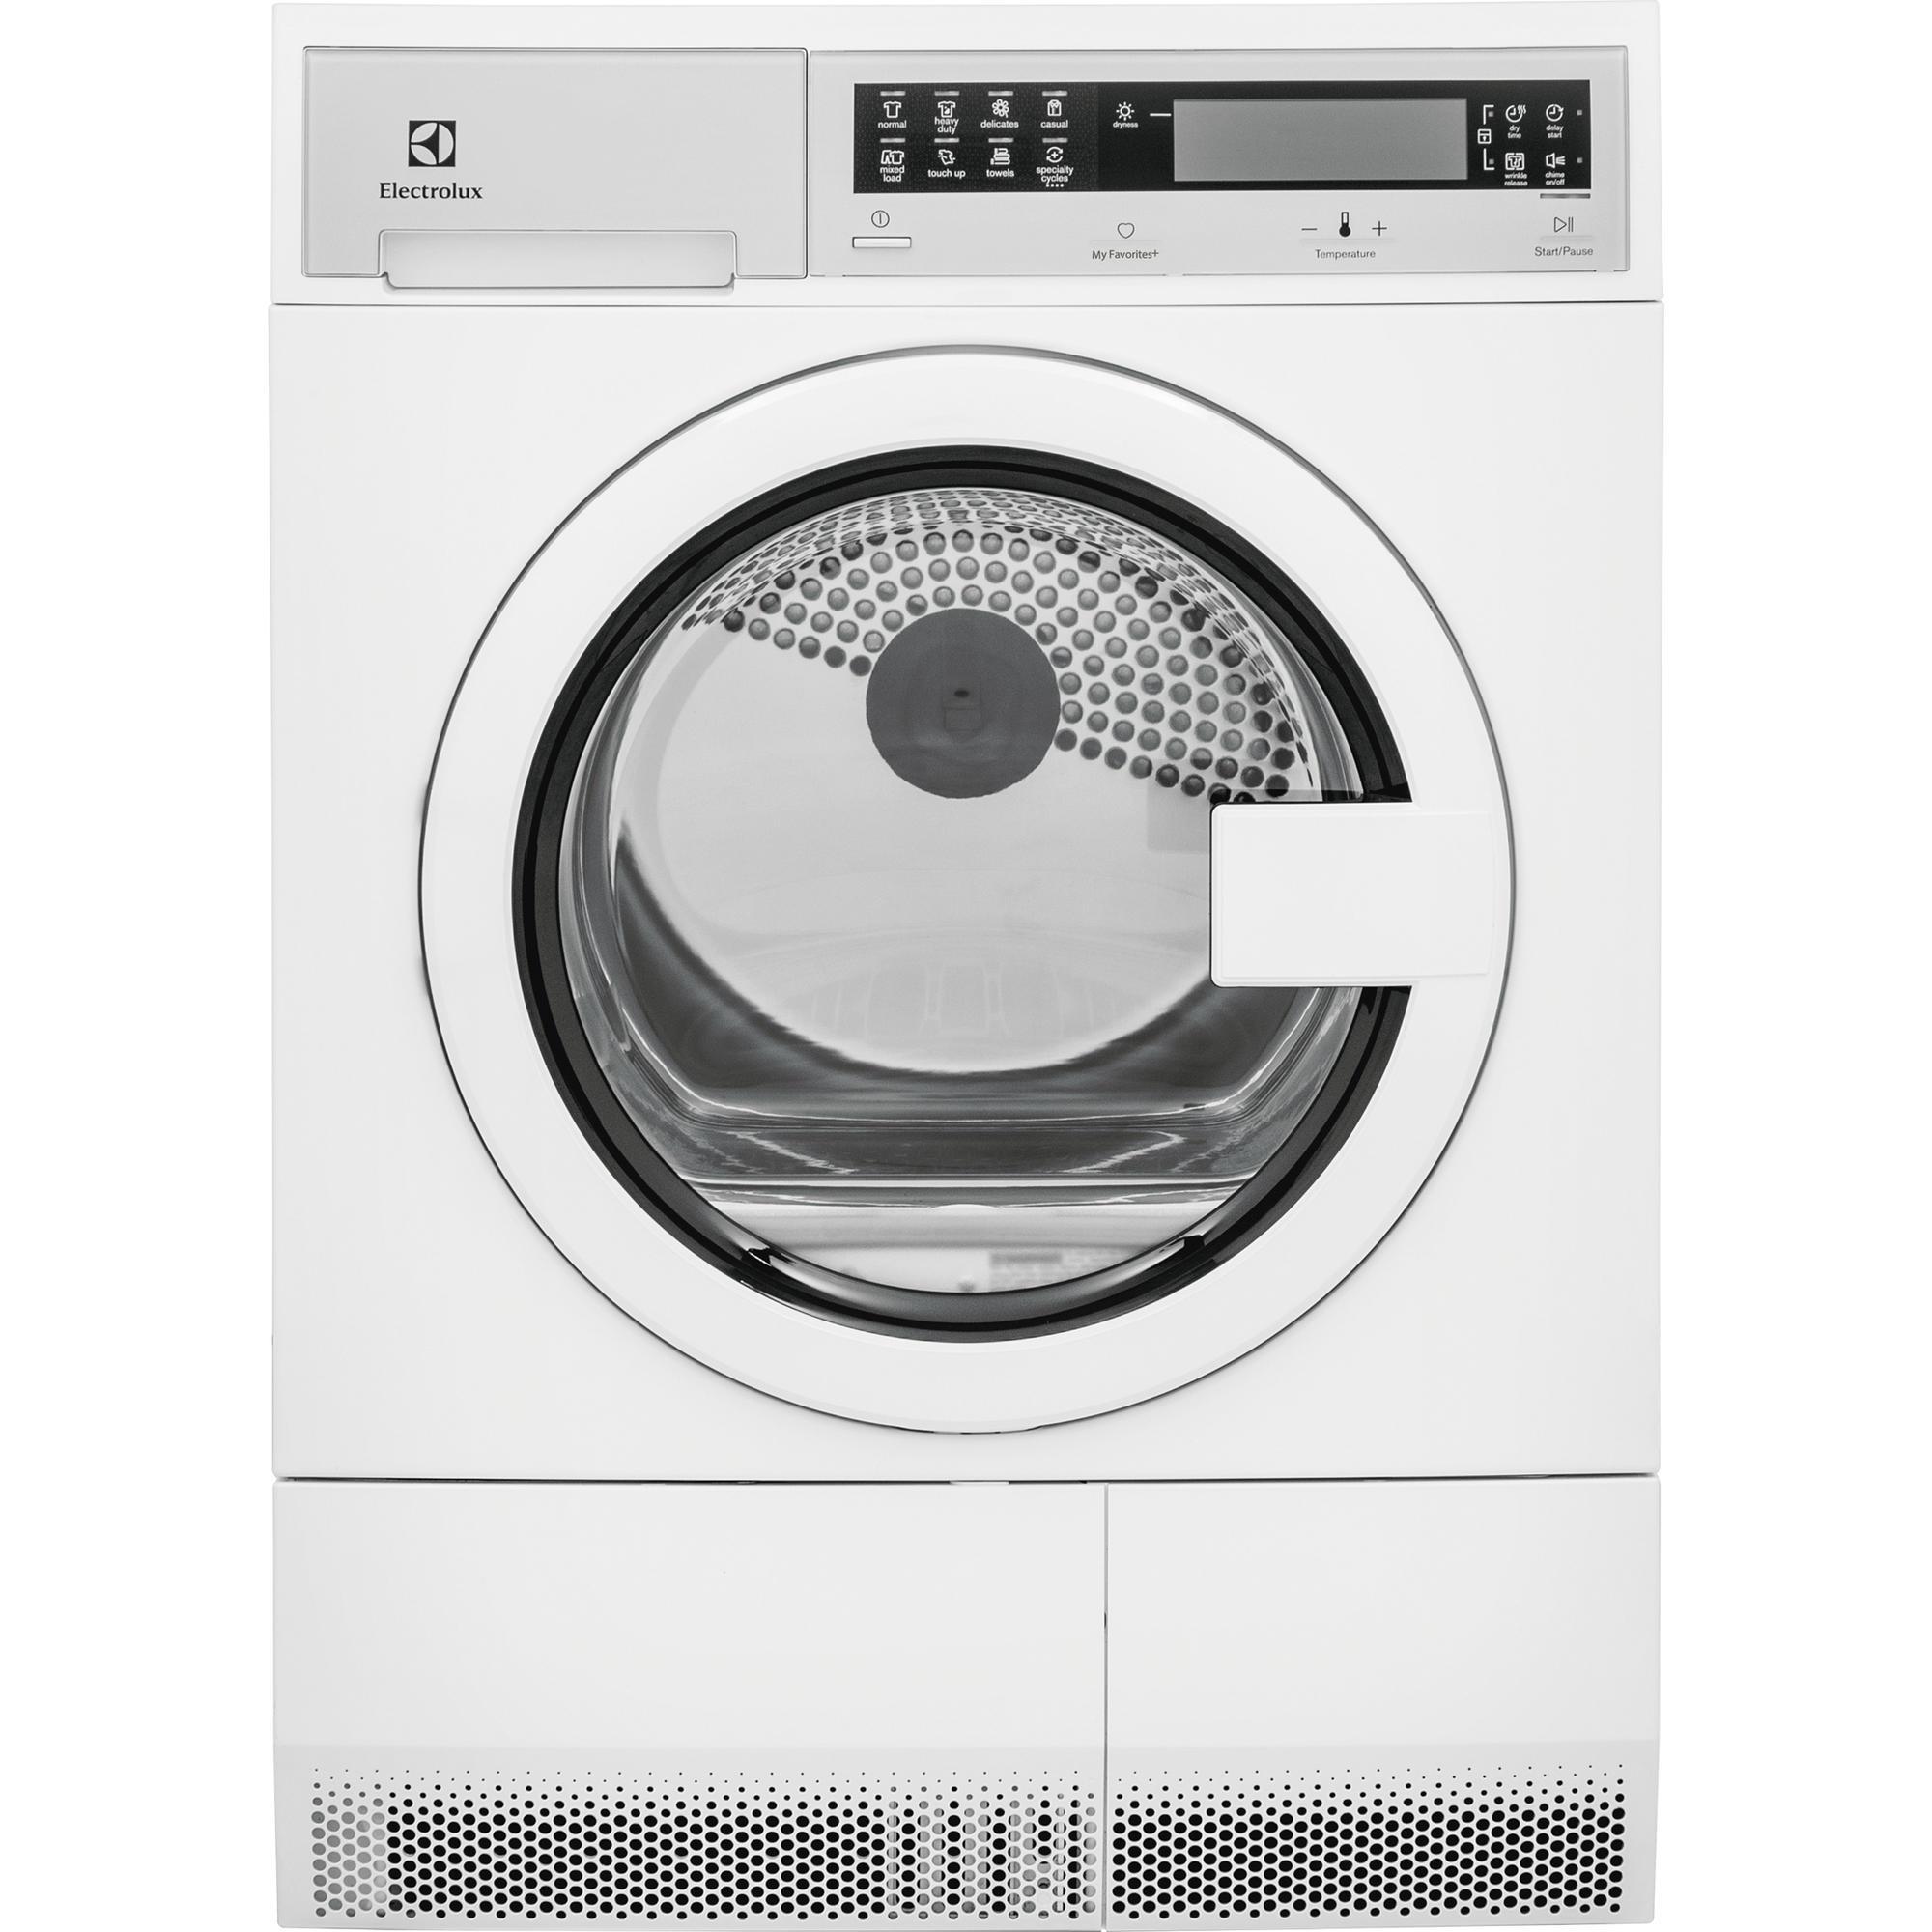 Electrolux EIED200QSW 4.0 Cu. Ft. Front Load Compact Ventless Dryer - White